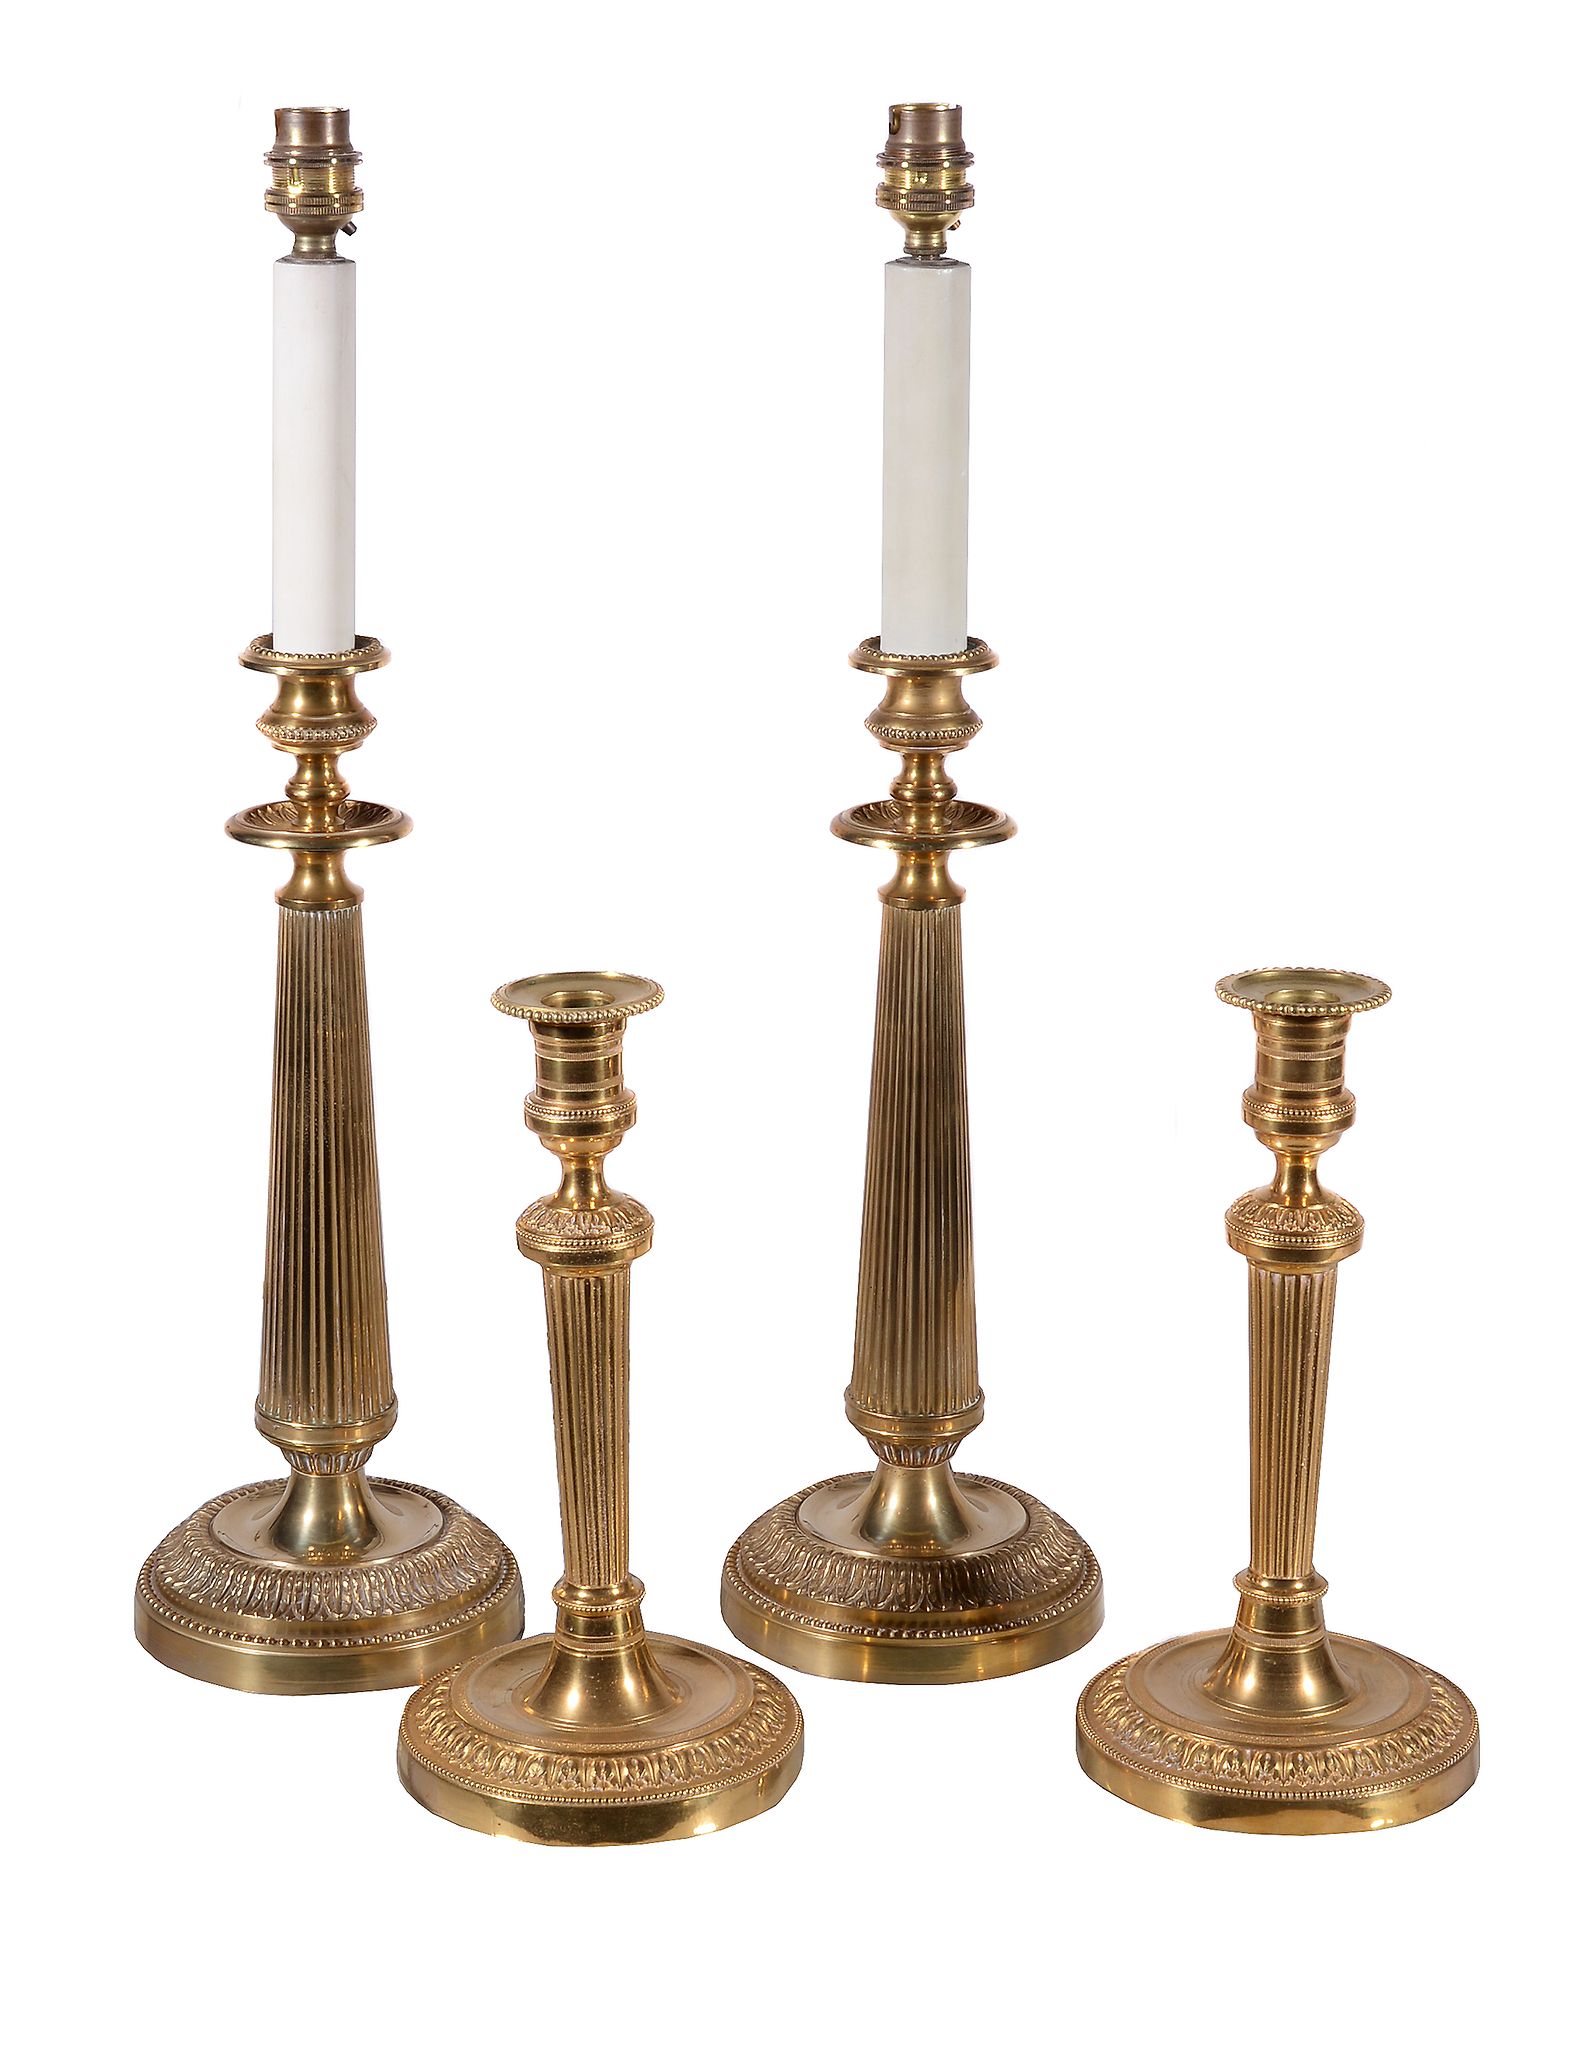 A pair of gilt metal table lamps modelled as early 19th century candlesticks, second half 20th